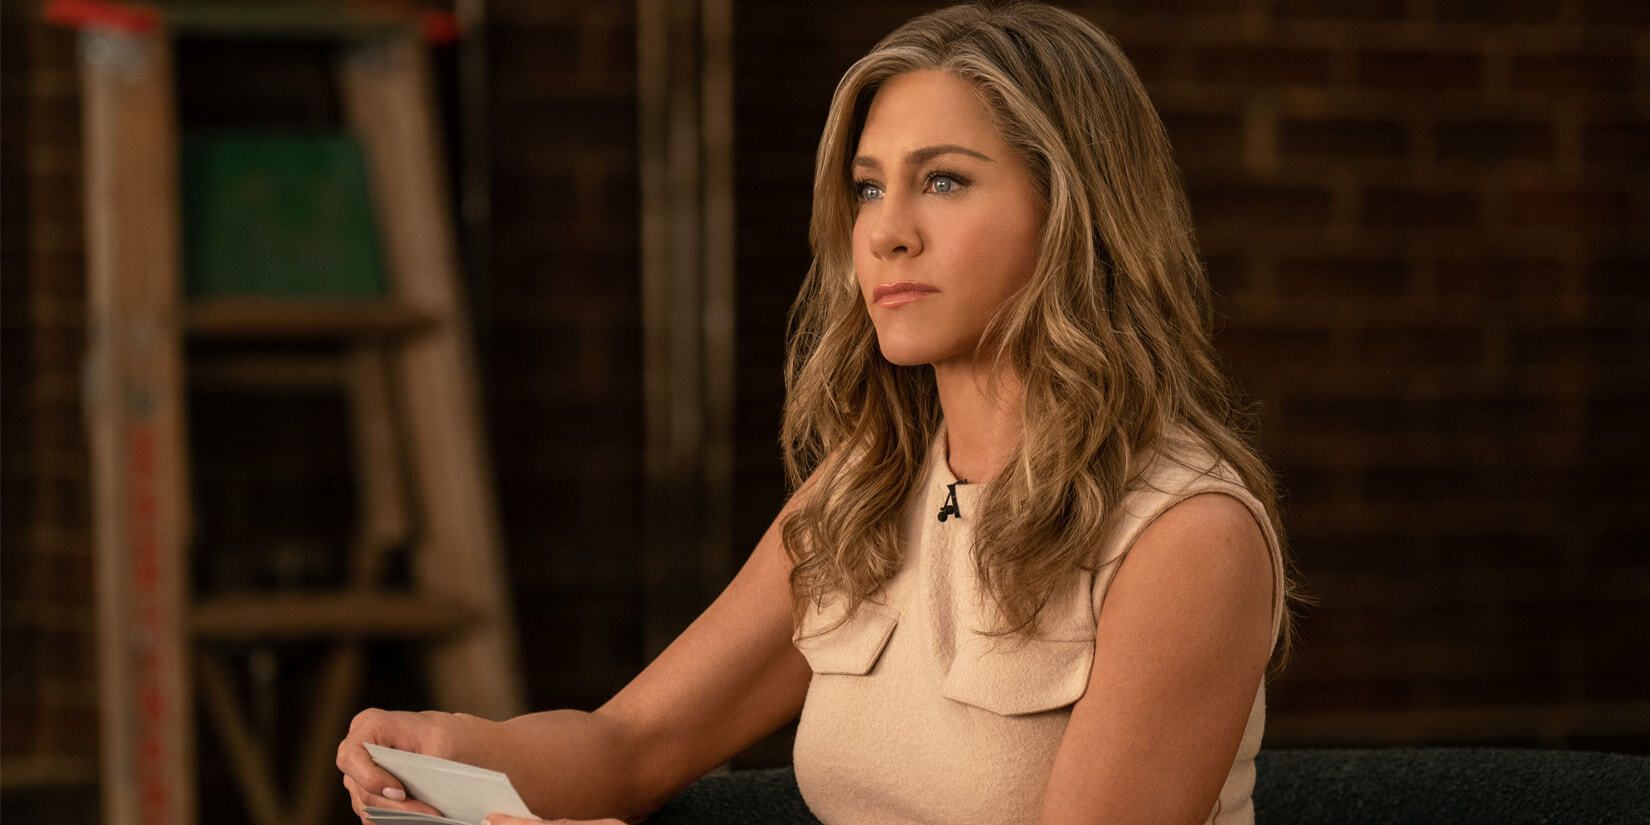 Jennifer Aniston As Alex Levy In The Morning Show Season 3 Episode 8